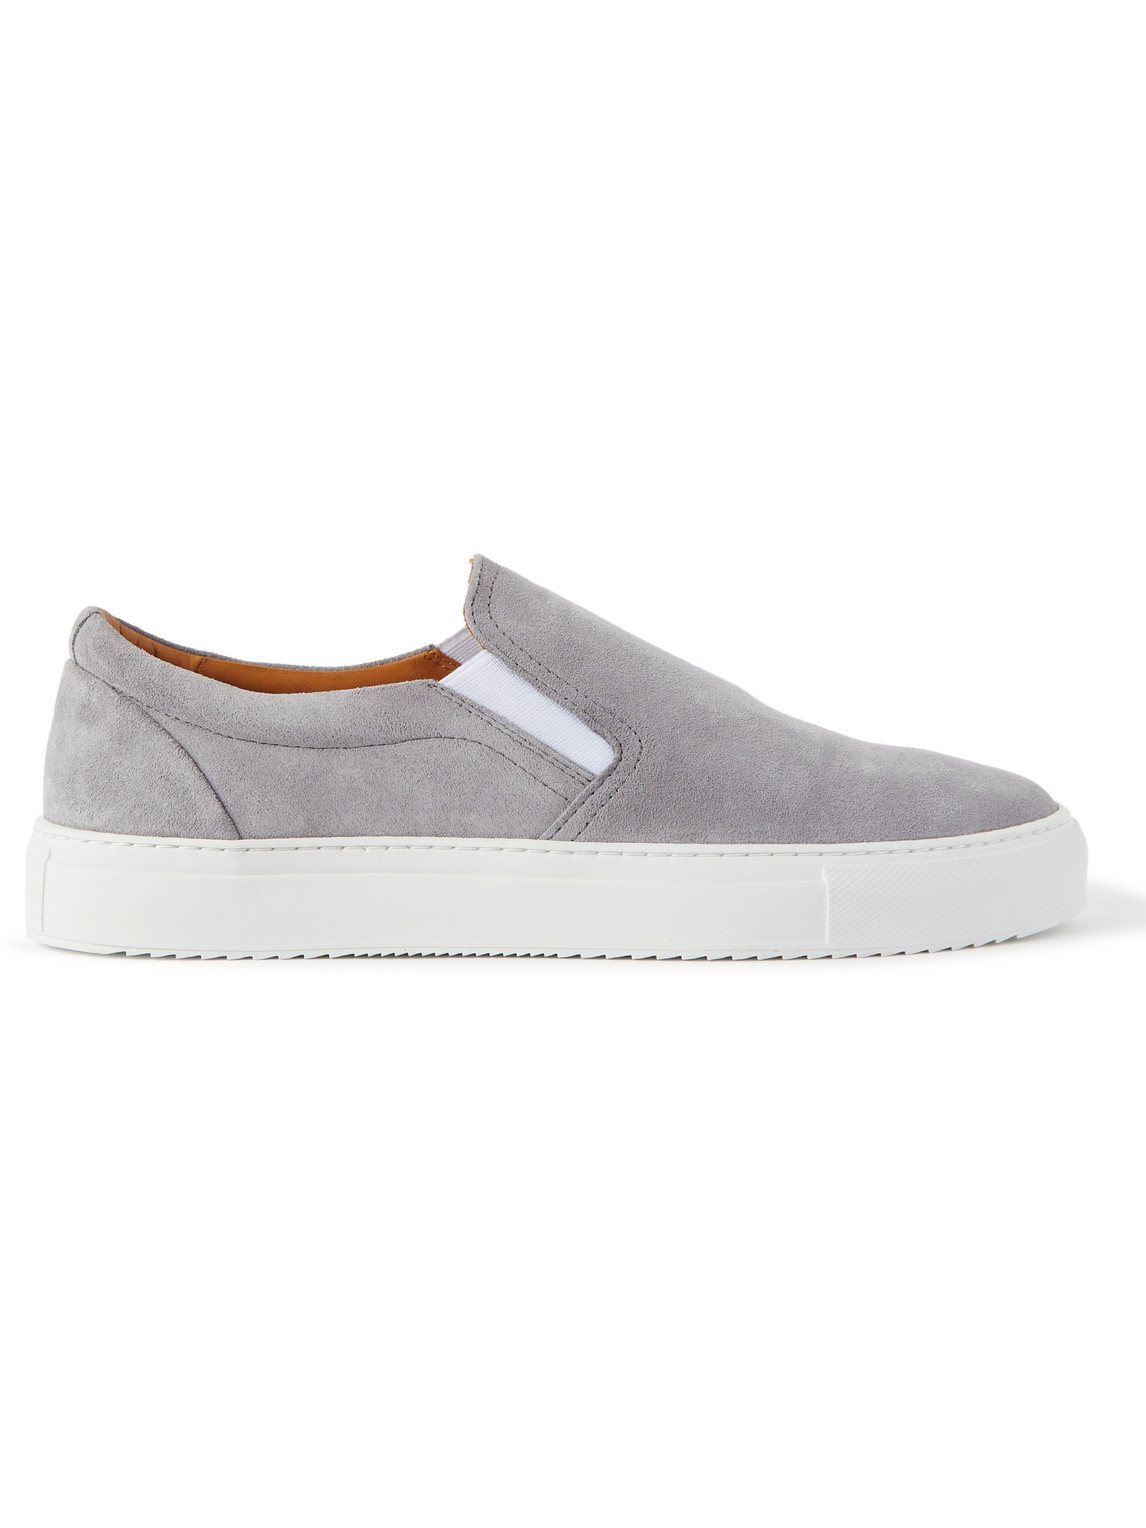 Regenerated Suede by evolo® Slip-On Sneakers